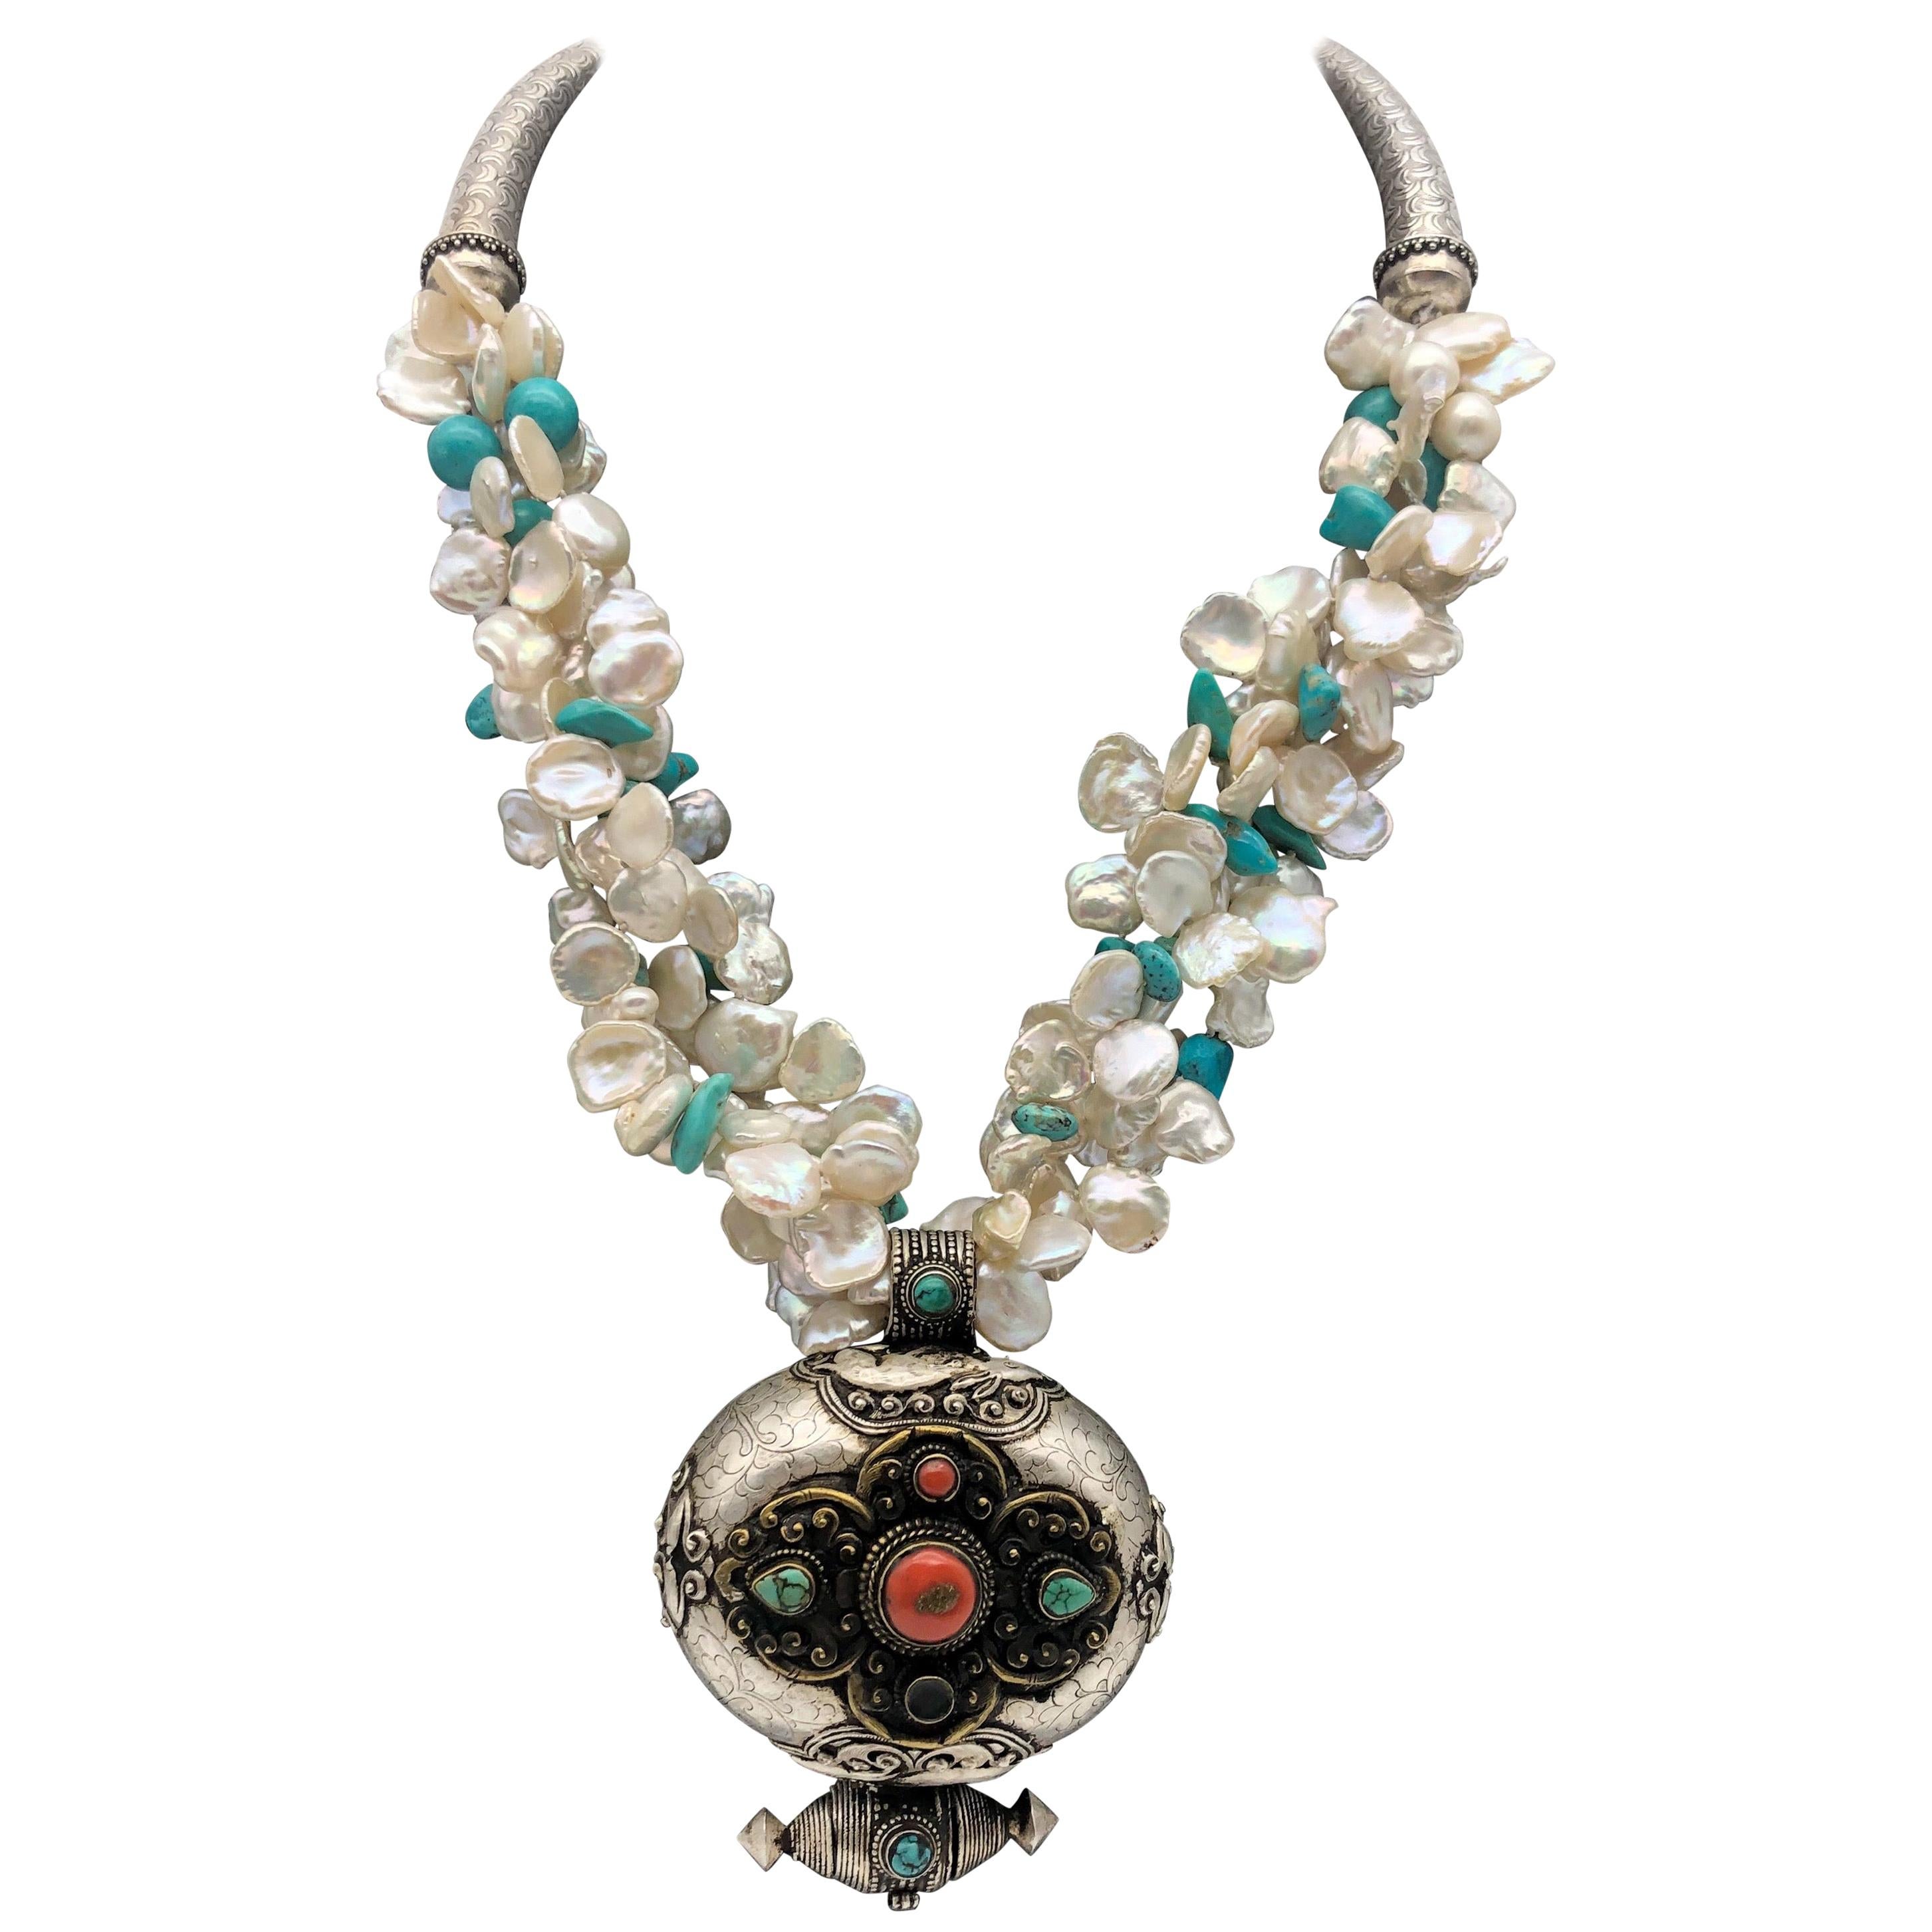 A.Jeschel Traditional Tibetan Ghau Box pendant with Turquoise and Keshi Pearls For Sale